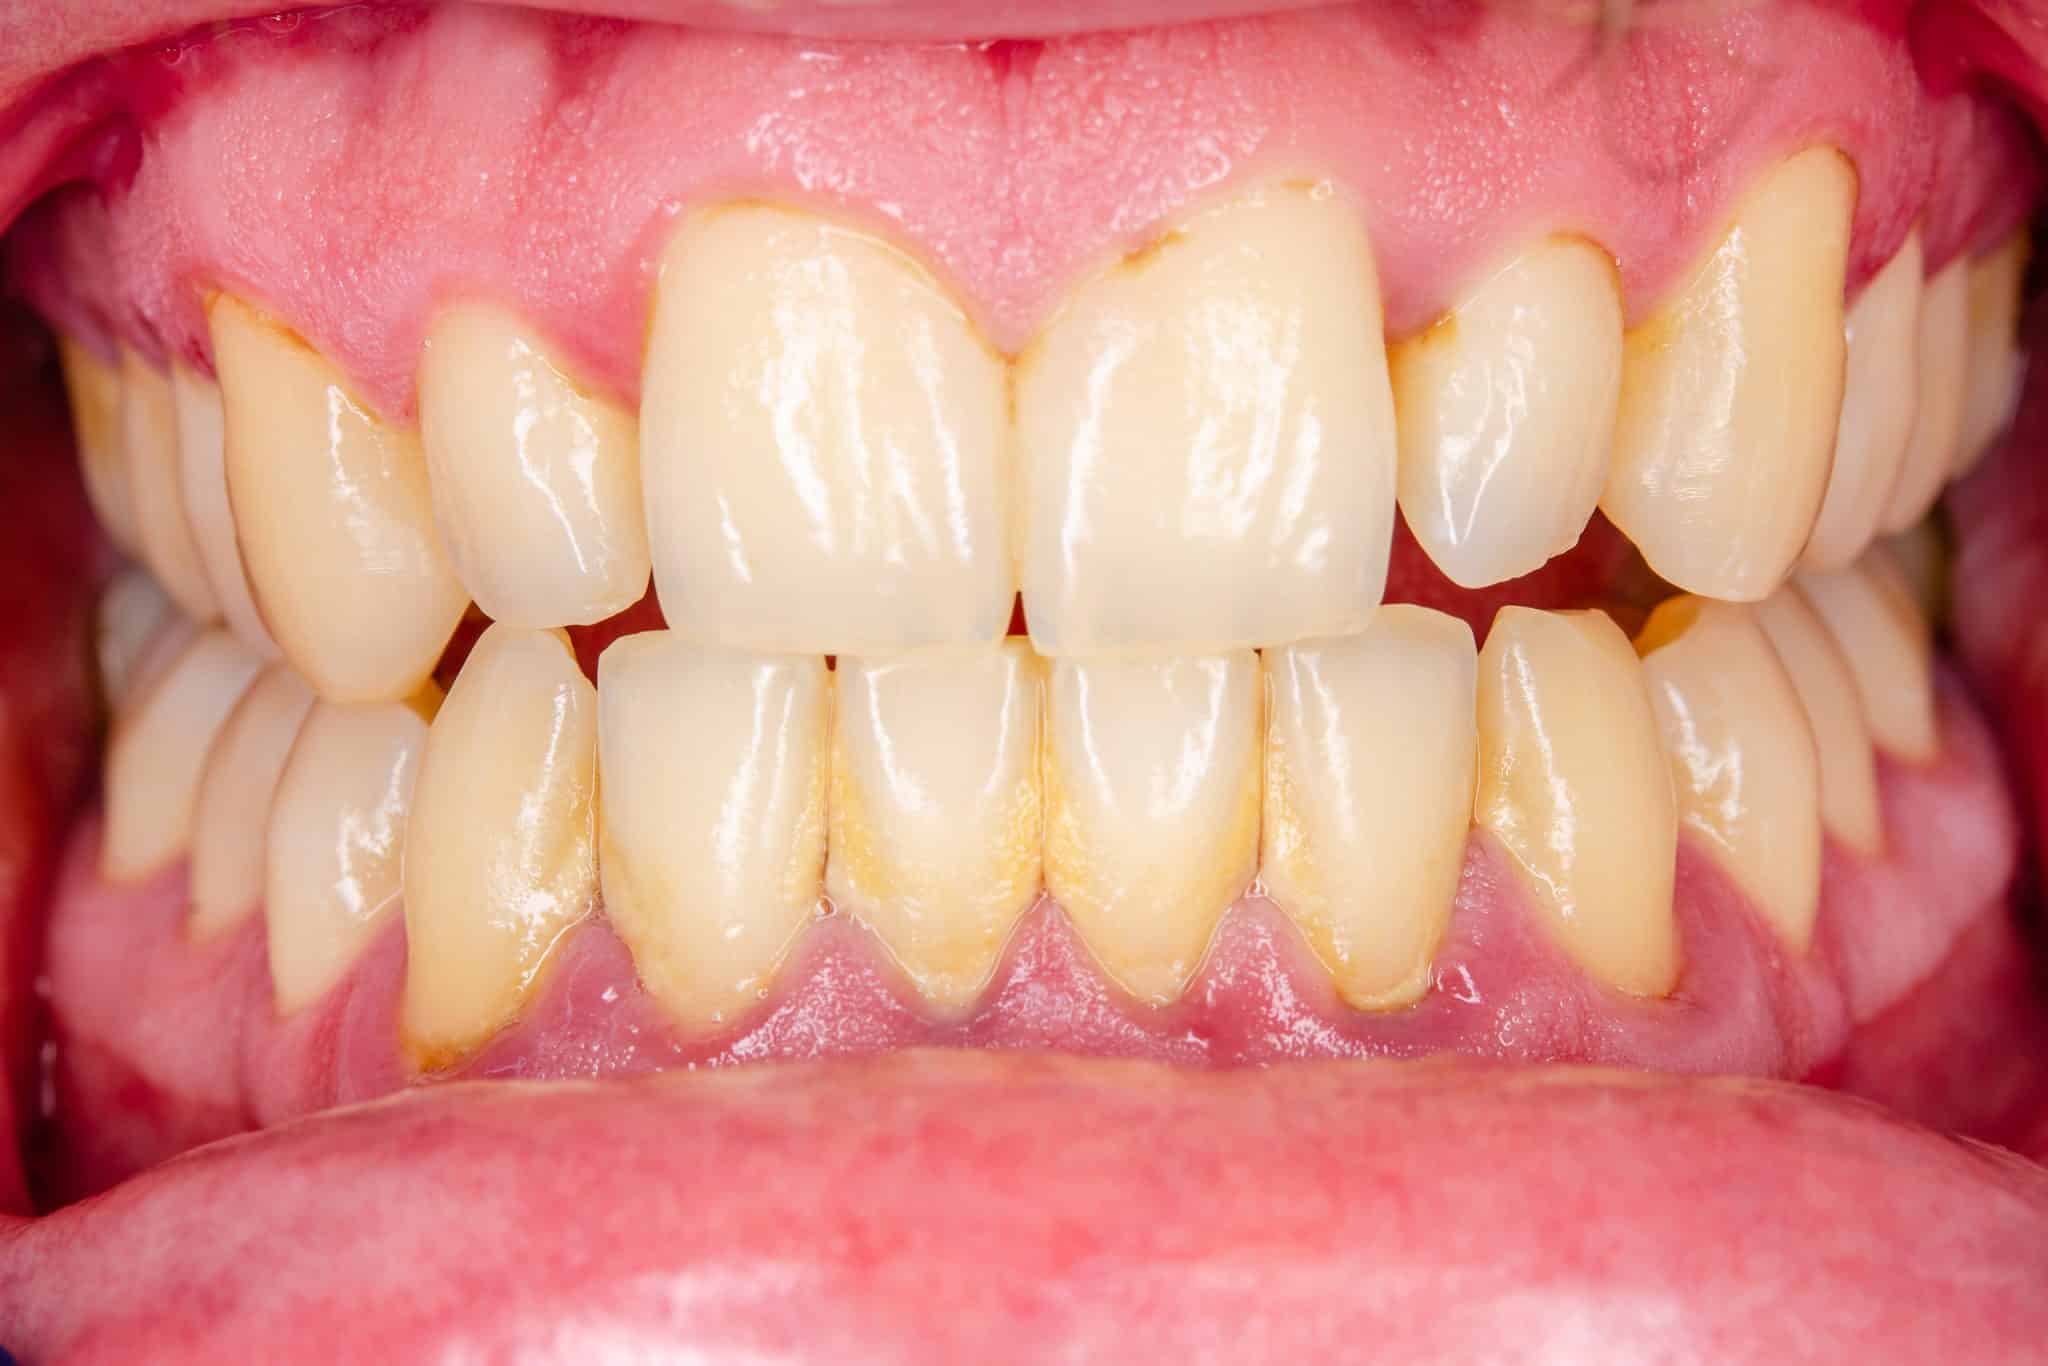 A close-up of a mouth with gingivitis